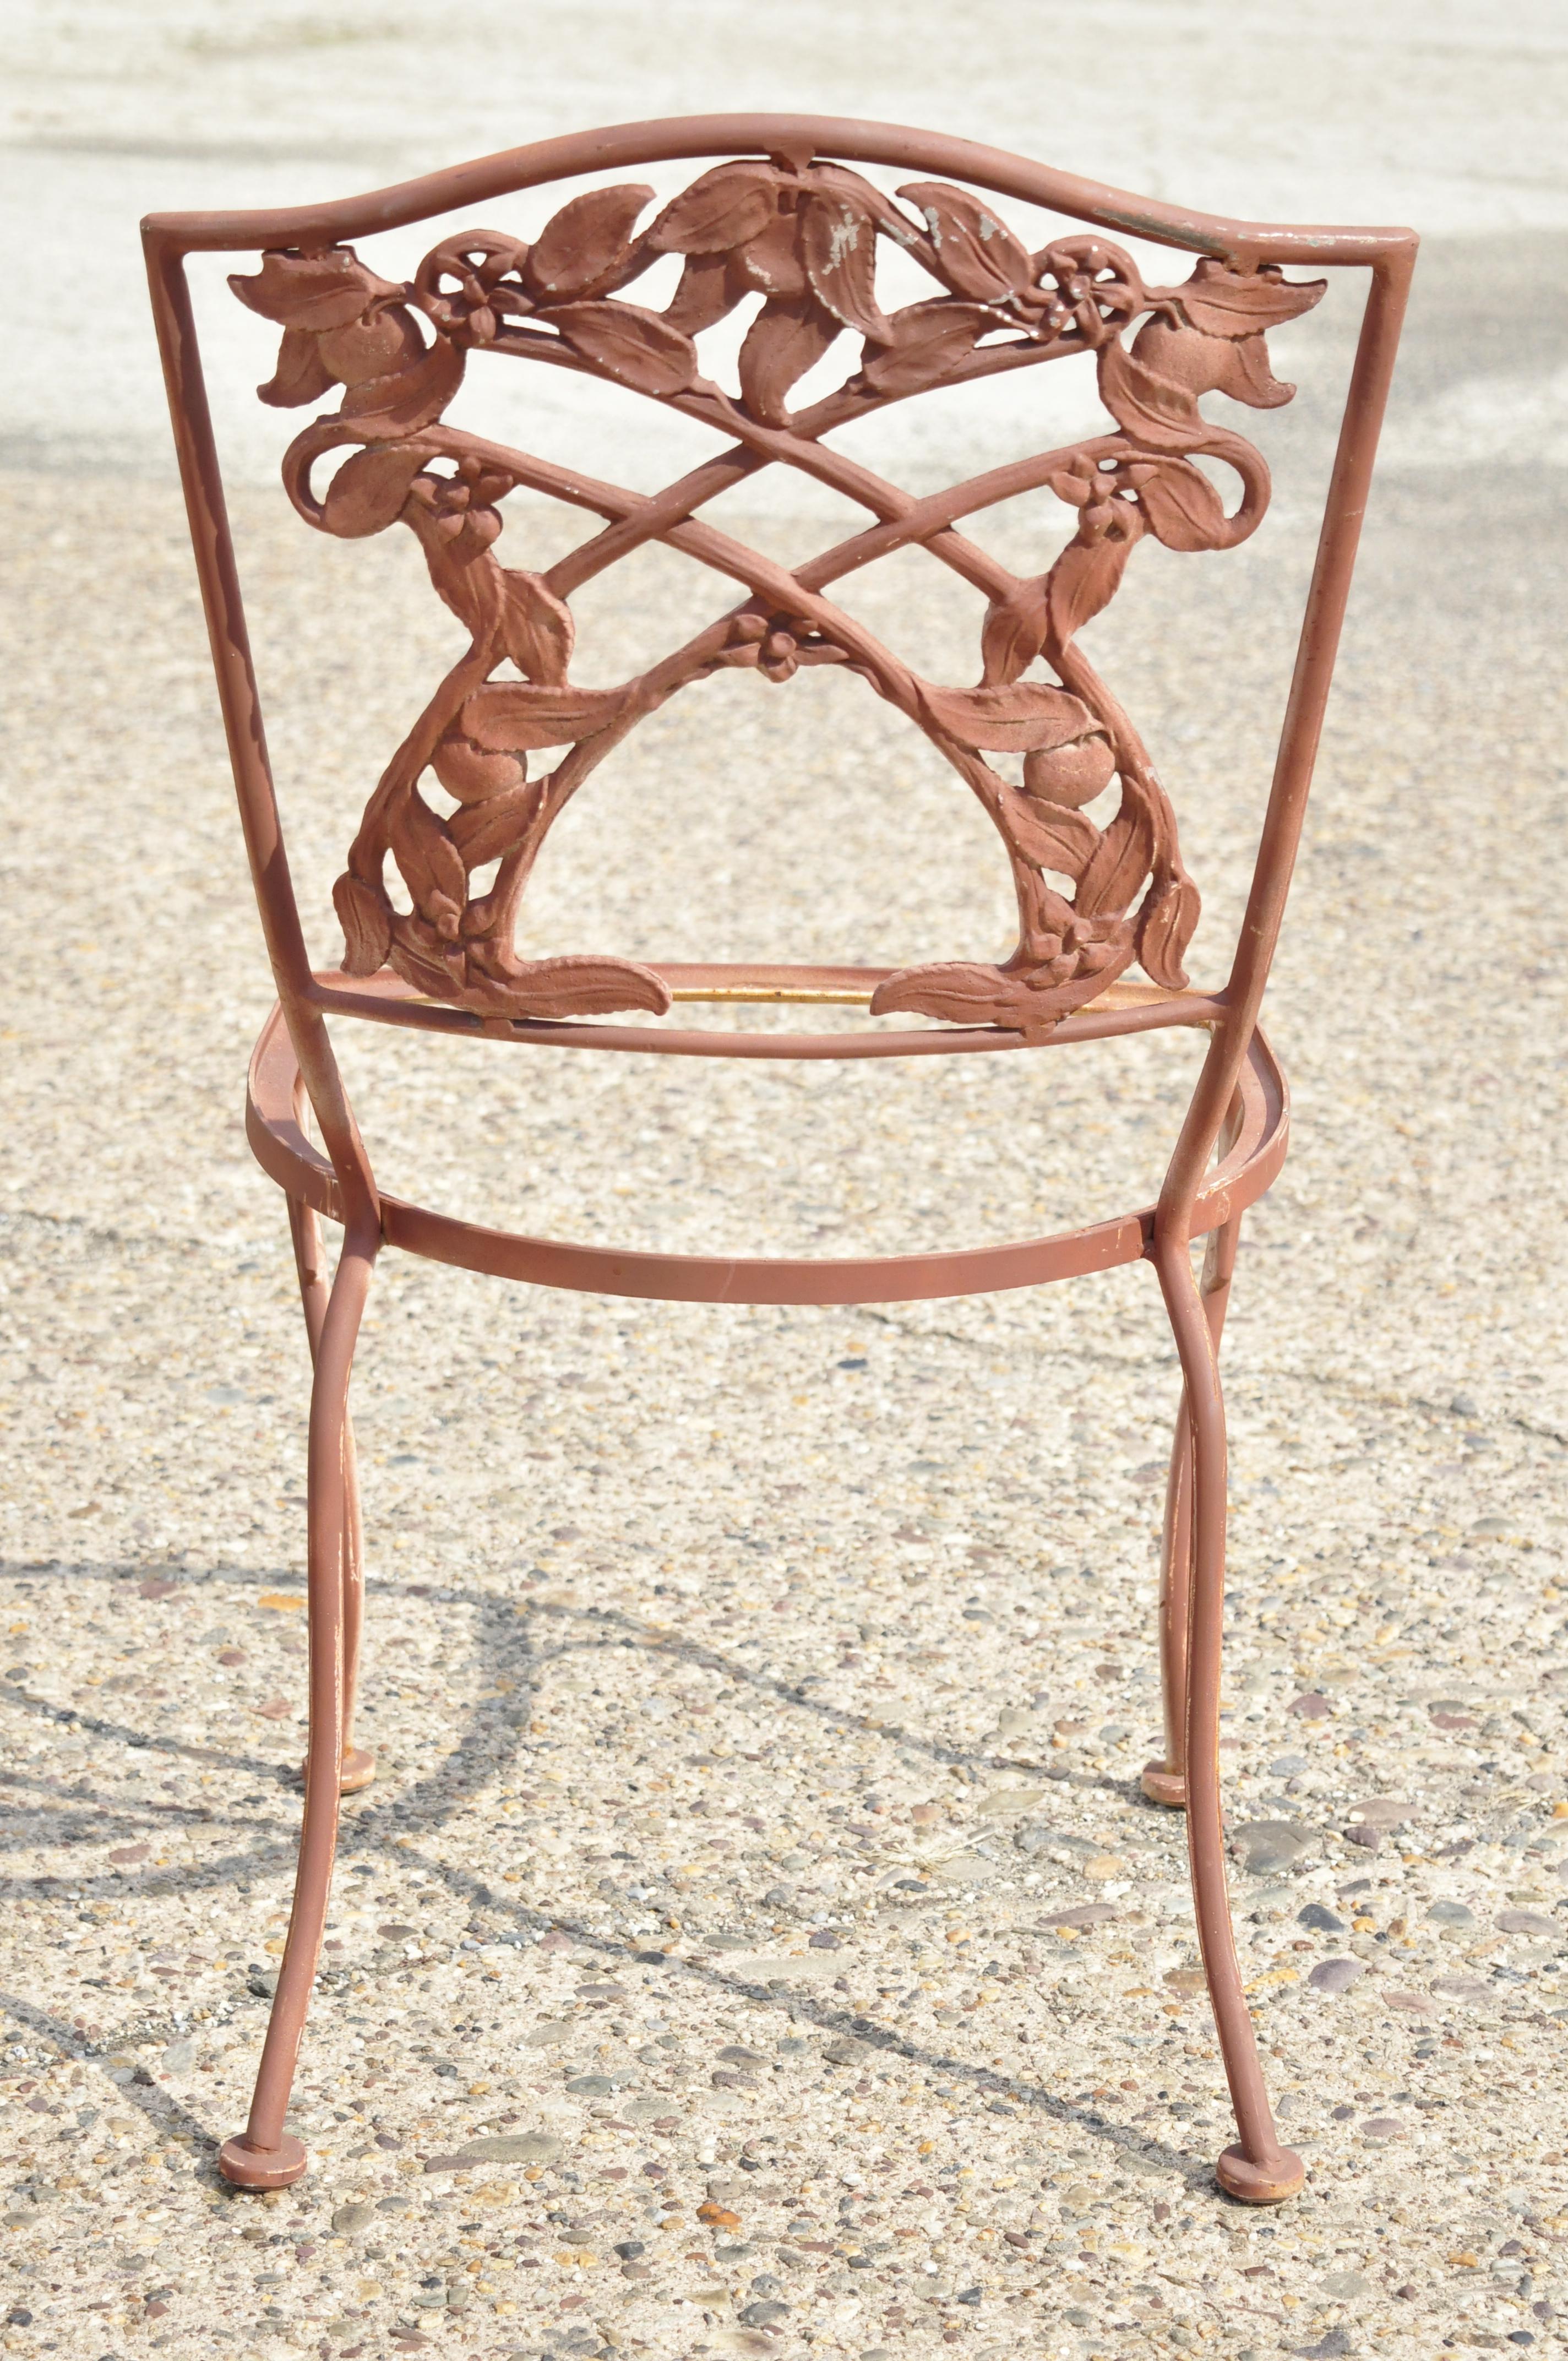 French Art Nouveau Vine Back Iron Outdoor Garden Dining Chairs, Set of 6 4